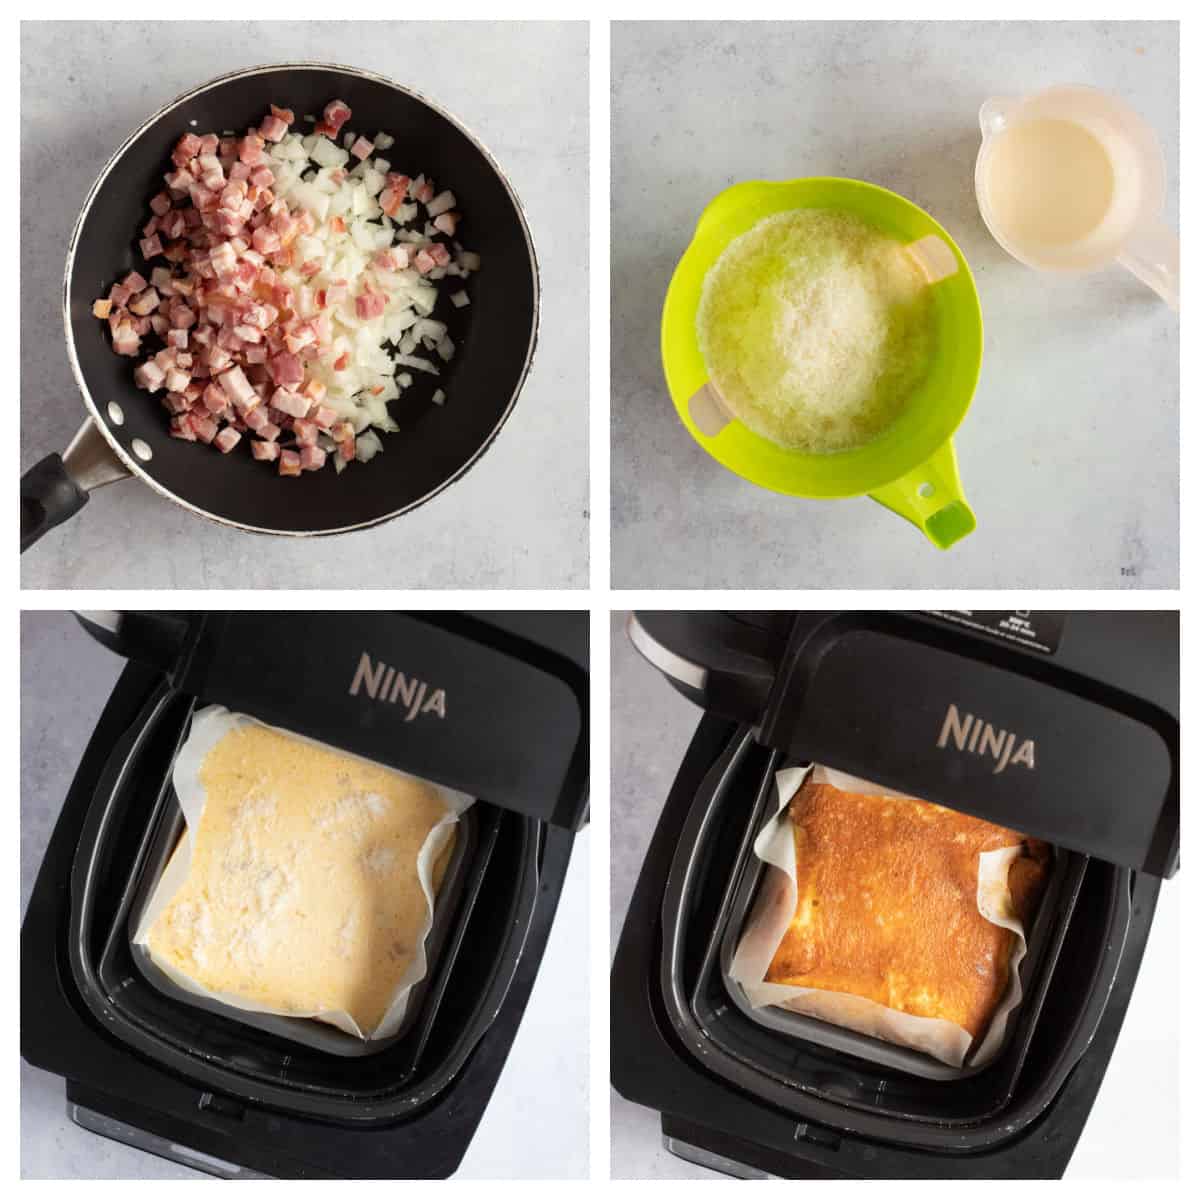 Making a crustless quiche in an air fryer (photo instruction collage).